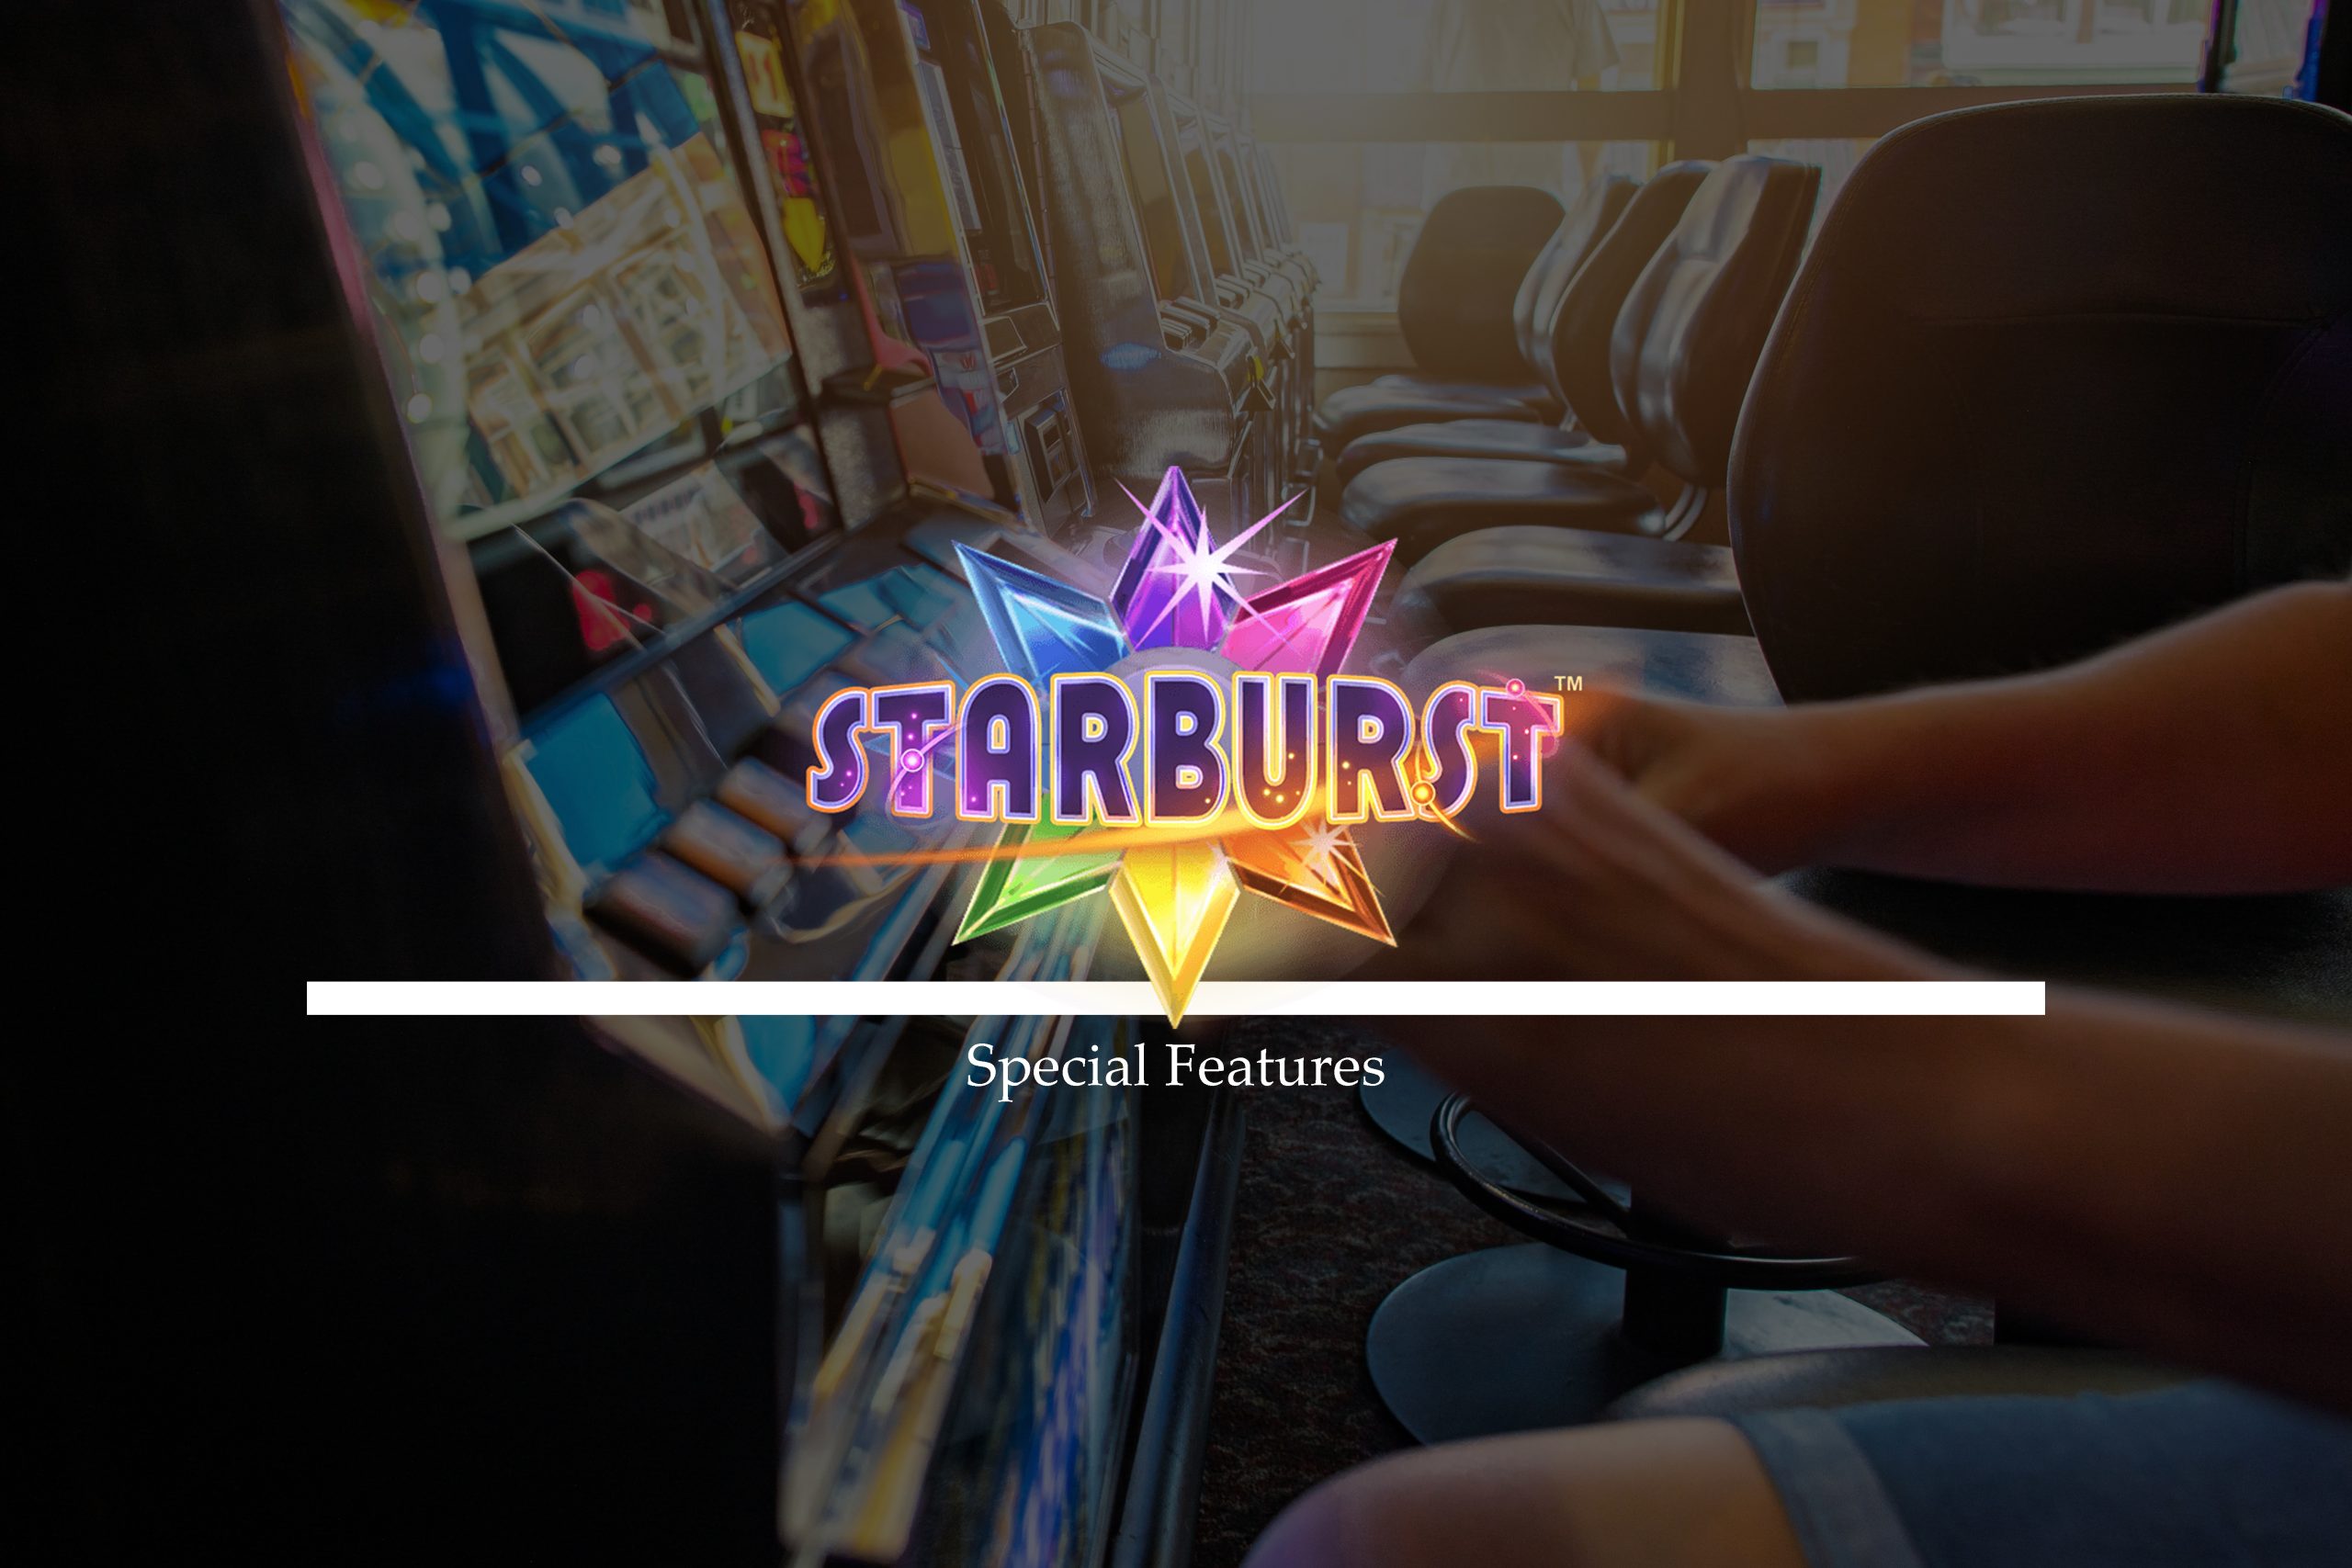 Special Feature Of Starburst Slot Not On Gamstop